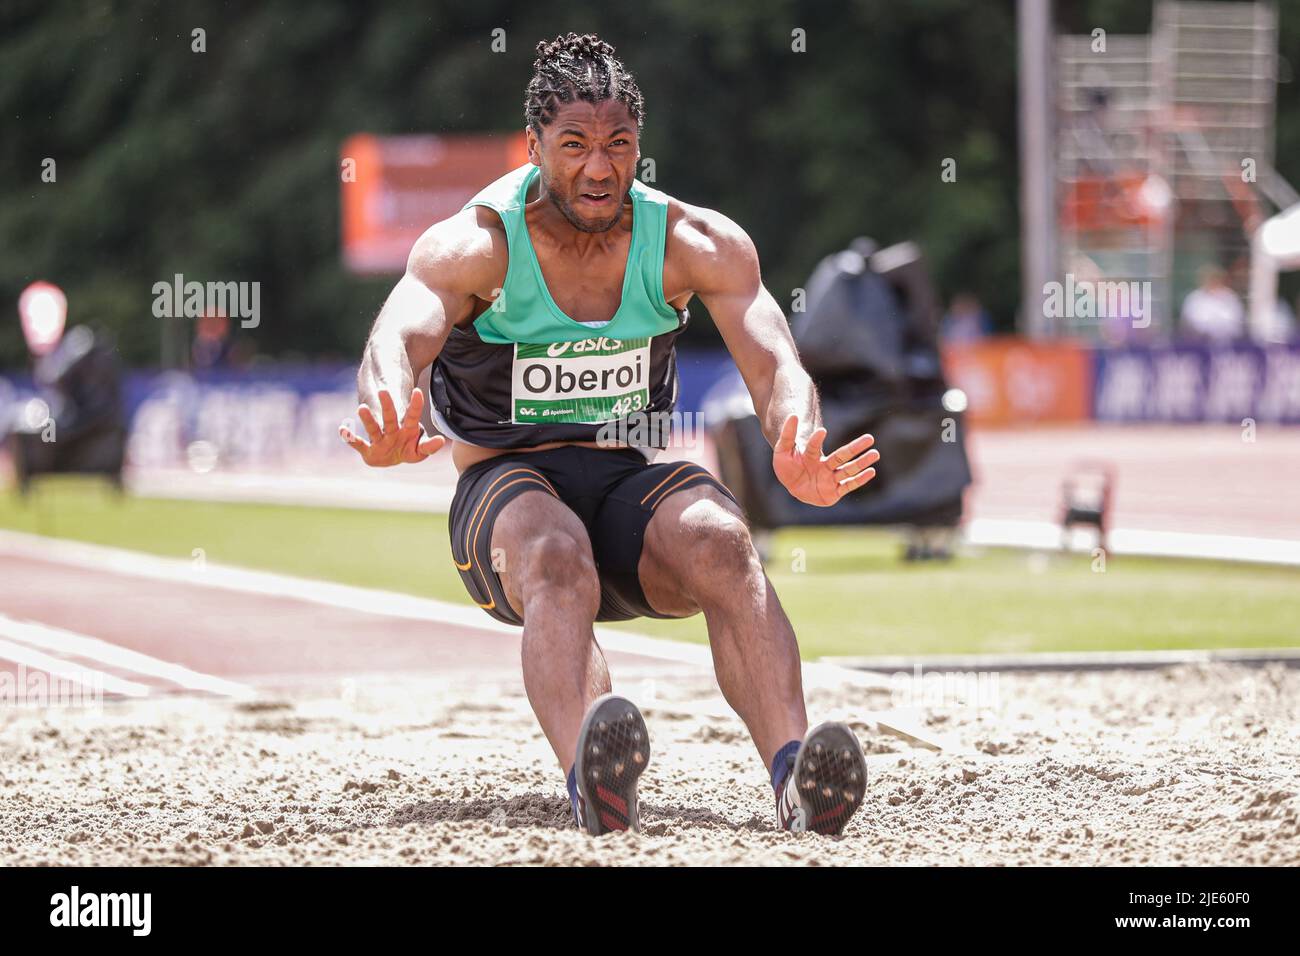 APELDOORN, NETHERLANDS - JUNE 25: Ranki Oberoi of The Netherlands competing in the Men's Long jump of the ASICS NK Atletiek 2022 - Day 2 at AV '34 on June 25, 2022 in Apeldoorn, Netherlands. (Photo by Peter Lous/Orange Pictures) Stock Photo